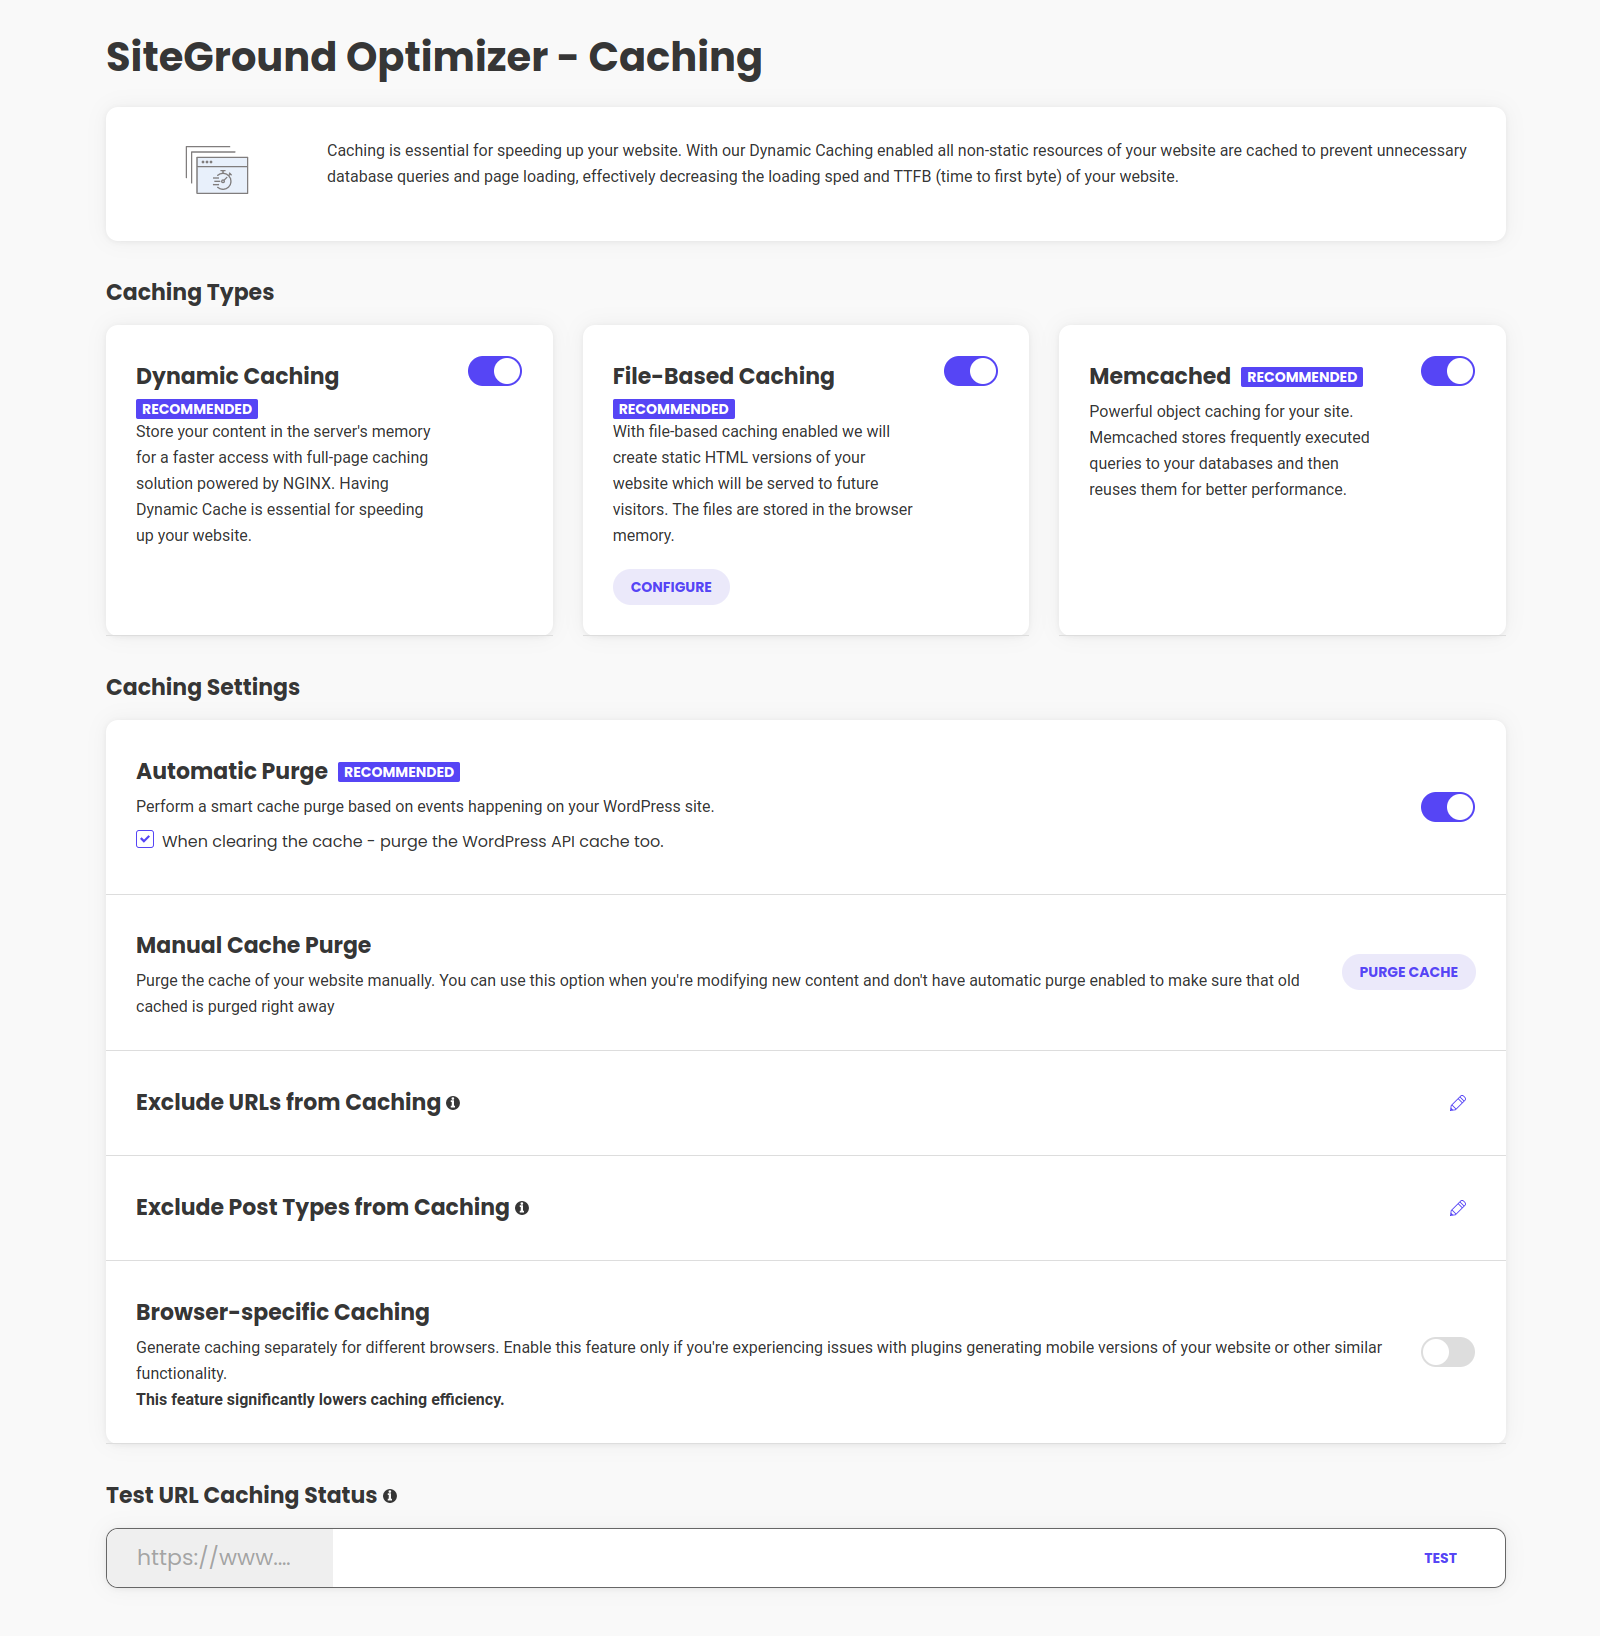 The SiteGround Optimizer Caching Page handles your Dynamic caching and Memcached. Here, you can exclude URls from the cache, test your site and purge the Dynamic caching manually.